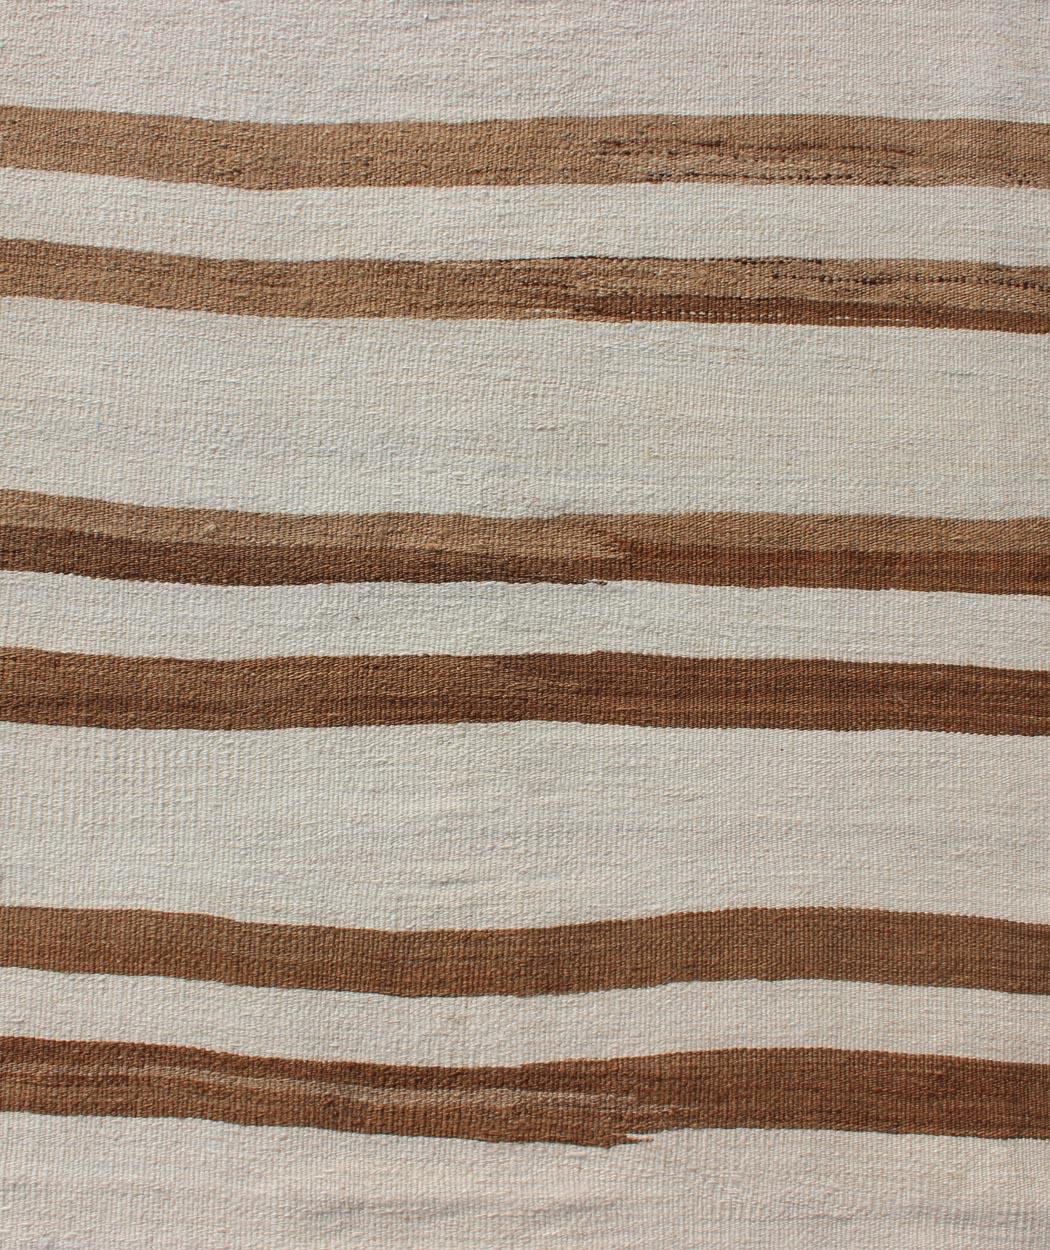 Minimalist Design Vintage Long Kilim Runner with Stripes in Brown and Ivory In Good Condition For Sale In Atlanta, GA